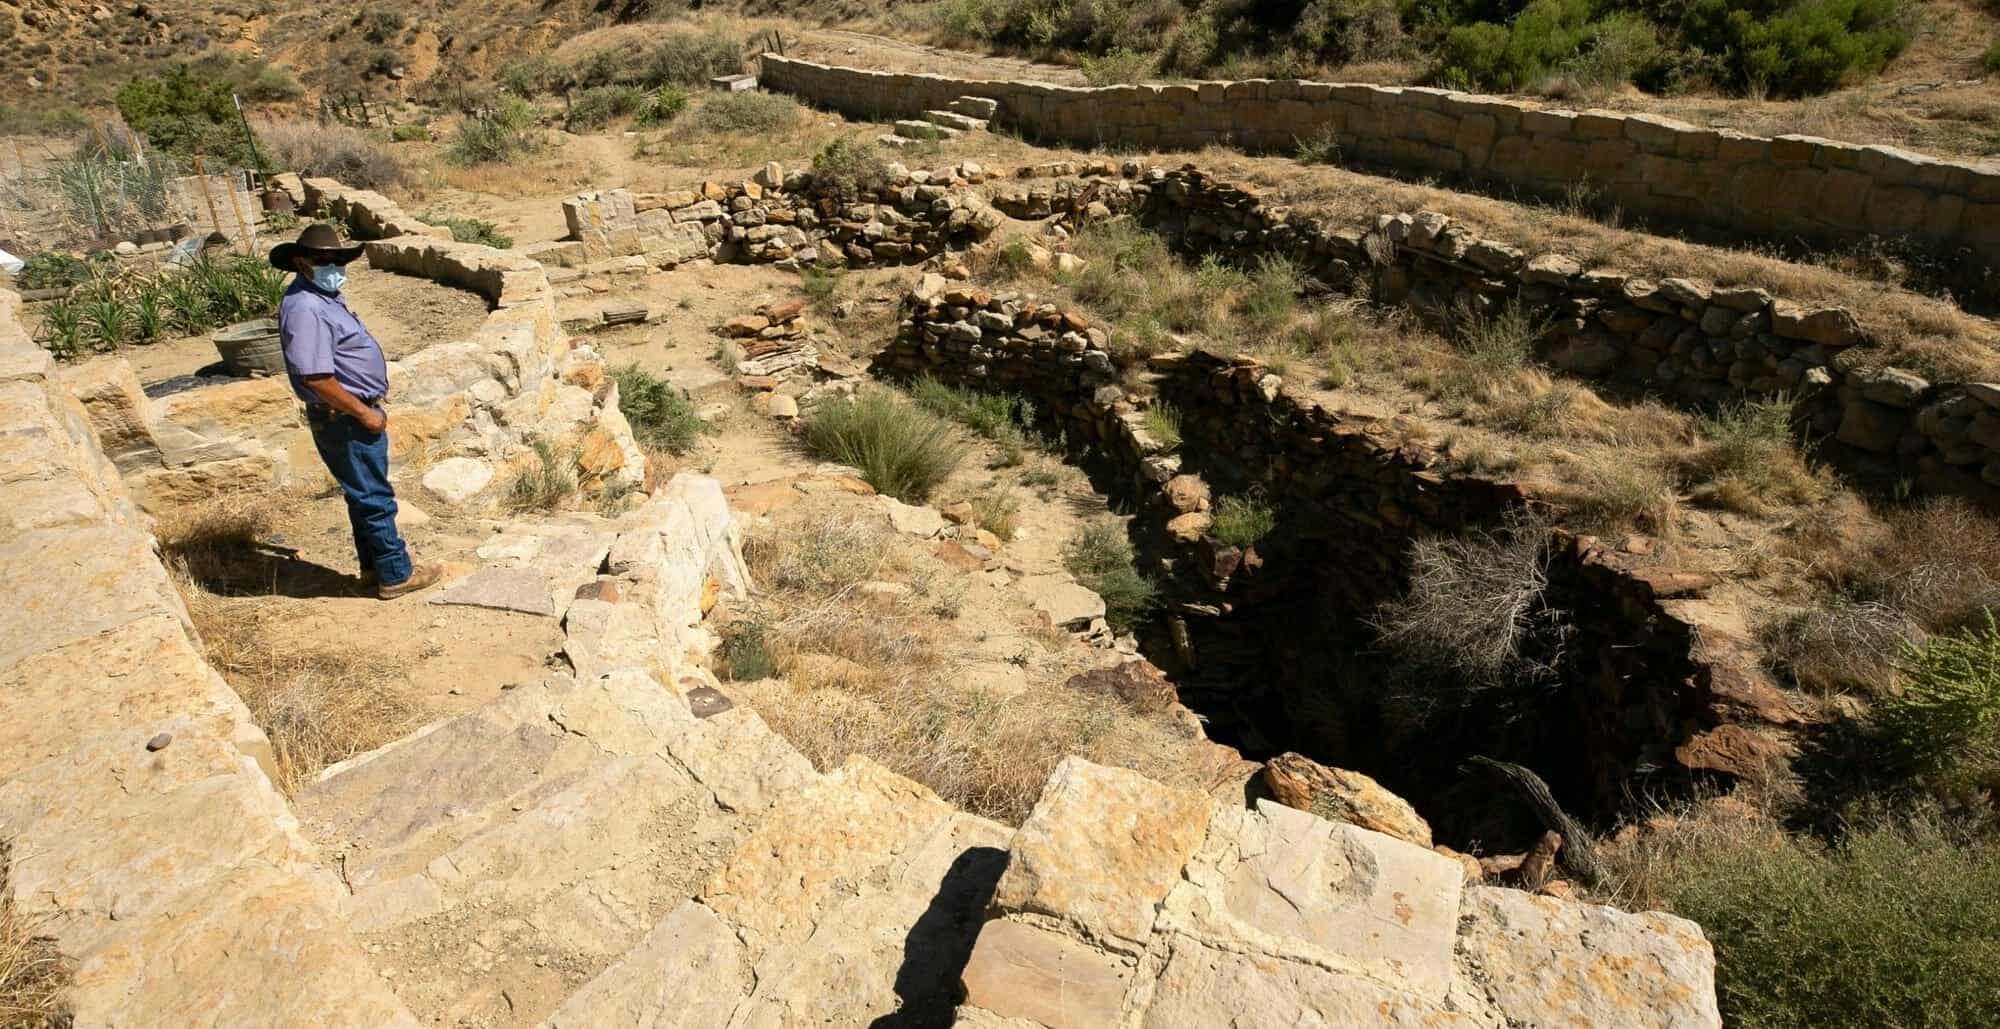 'Everything is drying up': As springs on Hopi land decline, a sacred connection is threatened